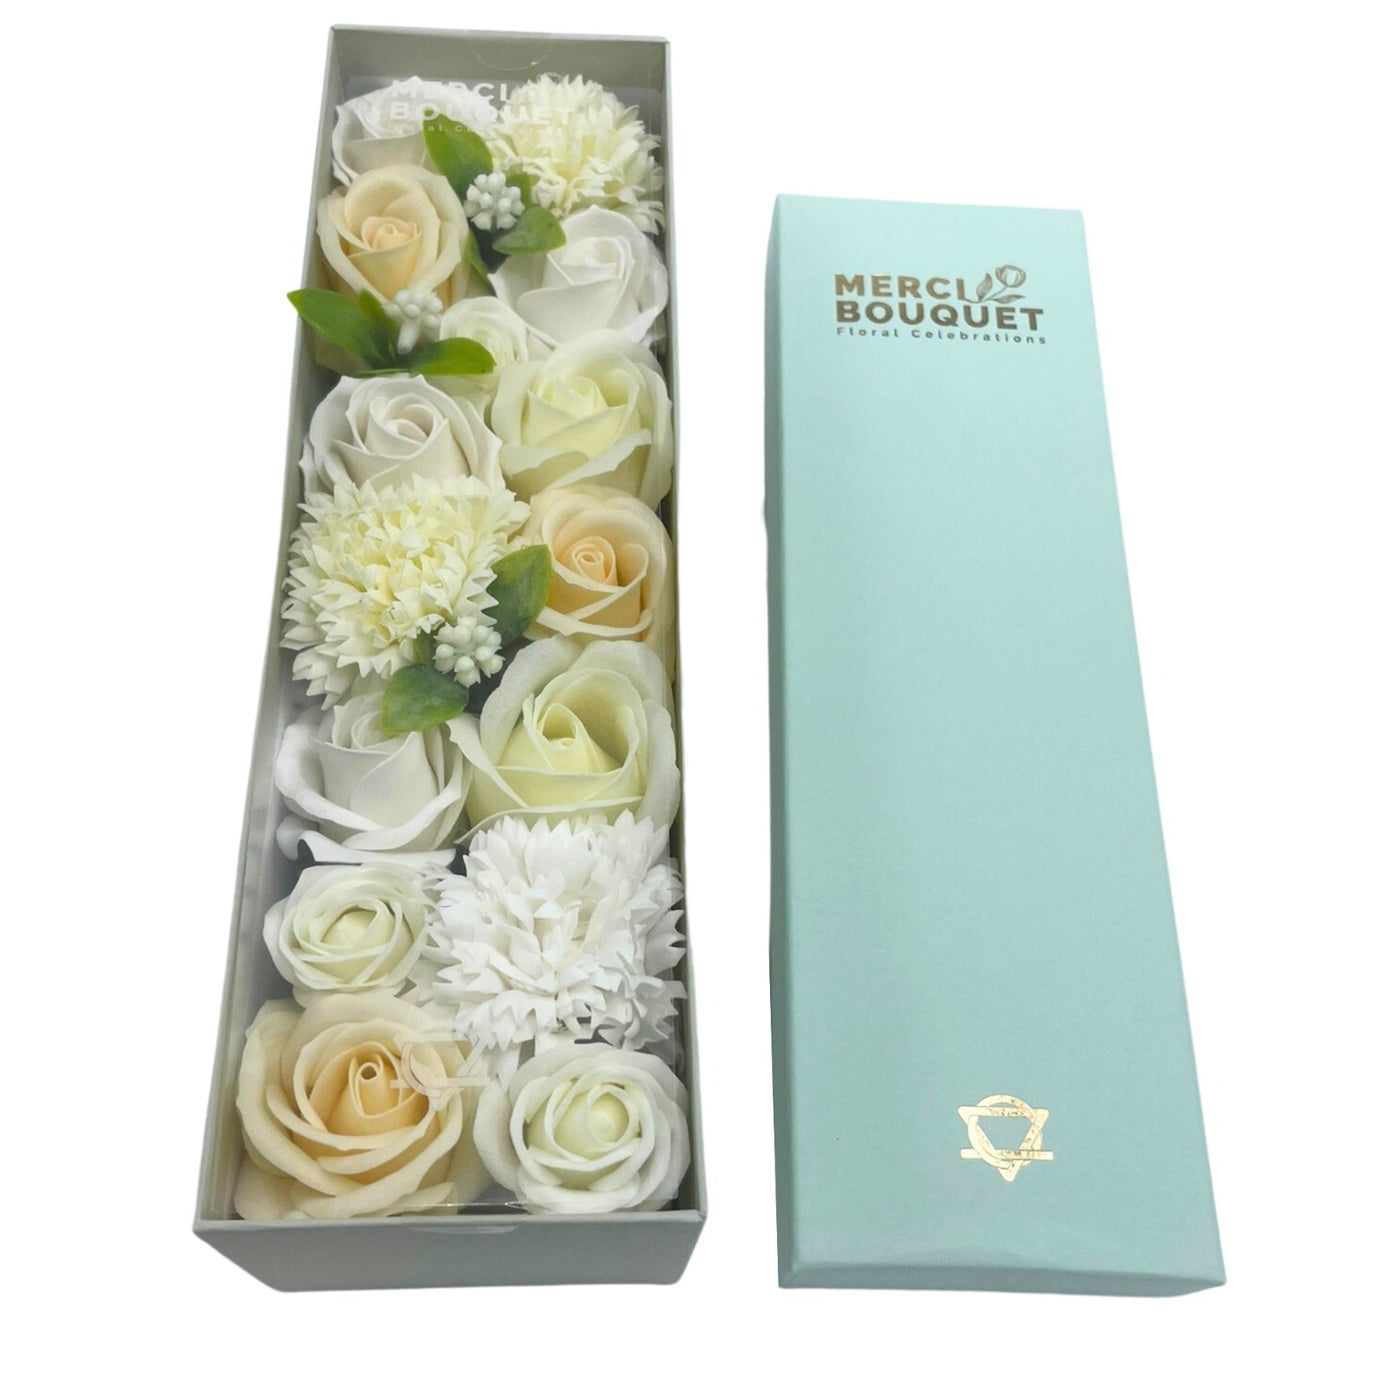 White And Ivory Scented Body And Bath Soap Flowers, Long Gift Box.